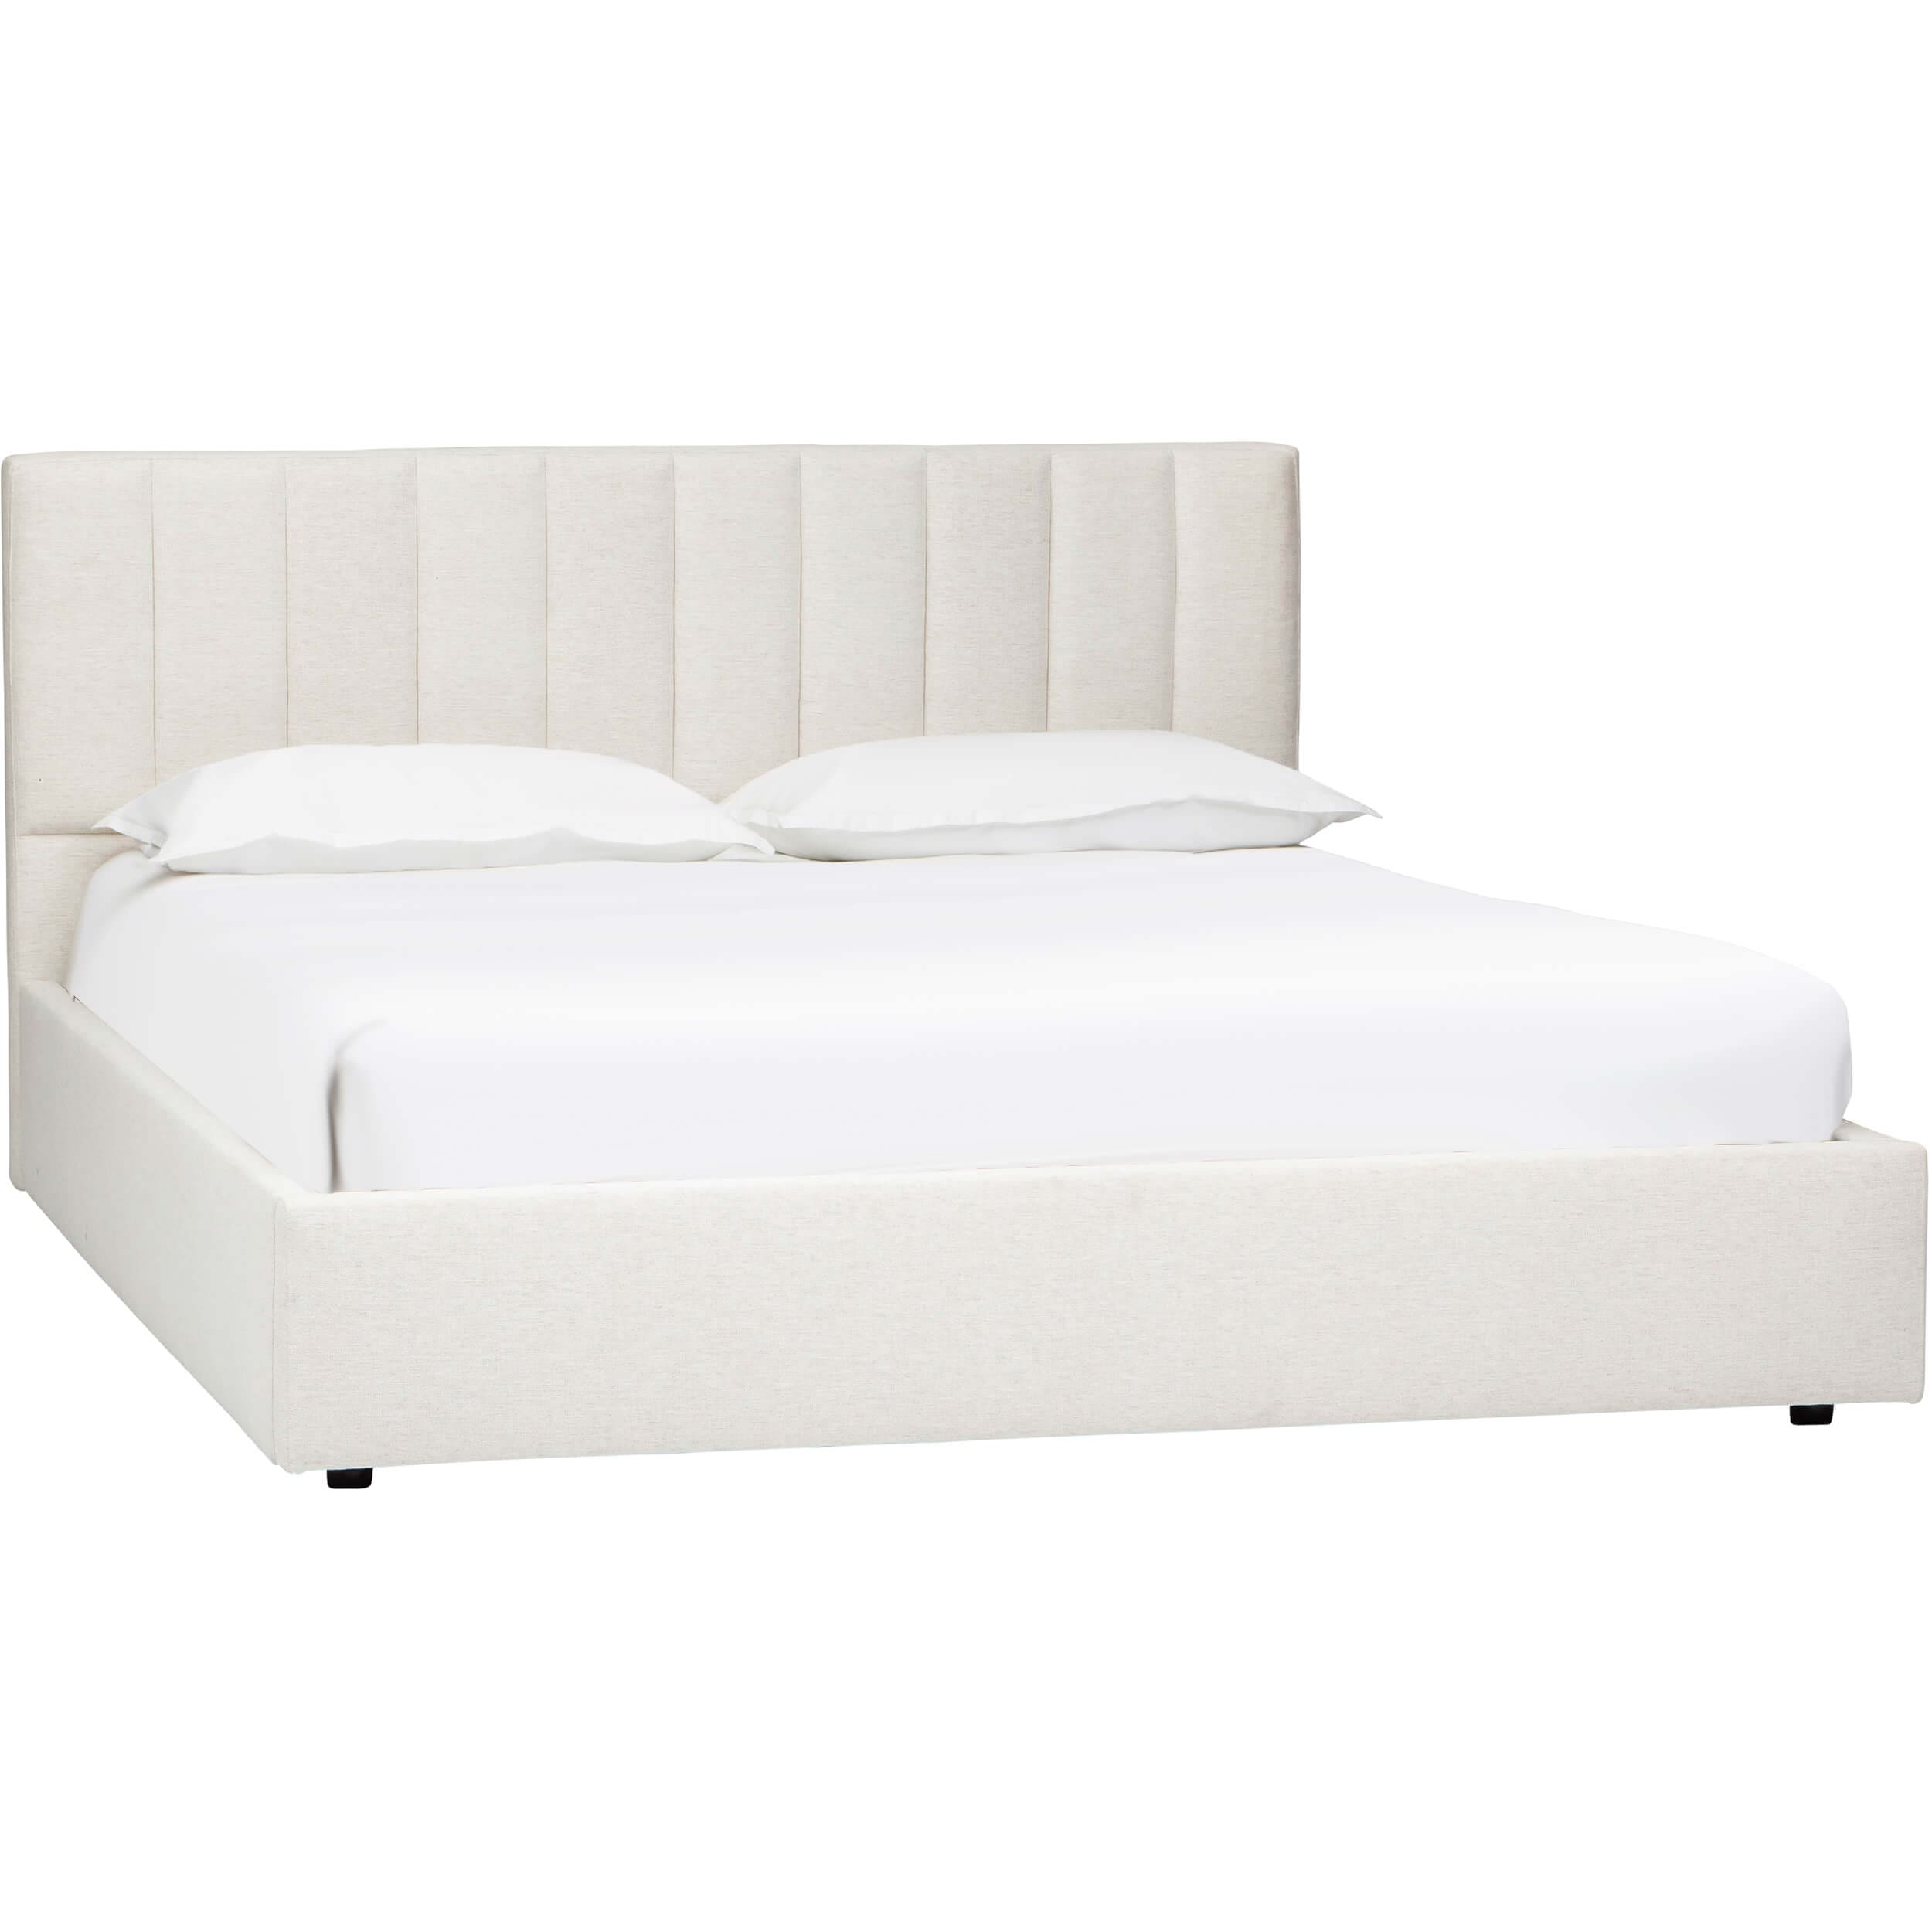 Image of Oswald Bed, Nomad Snow